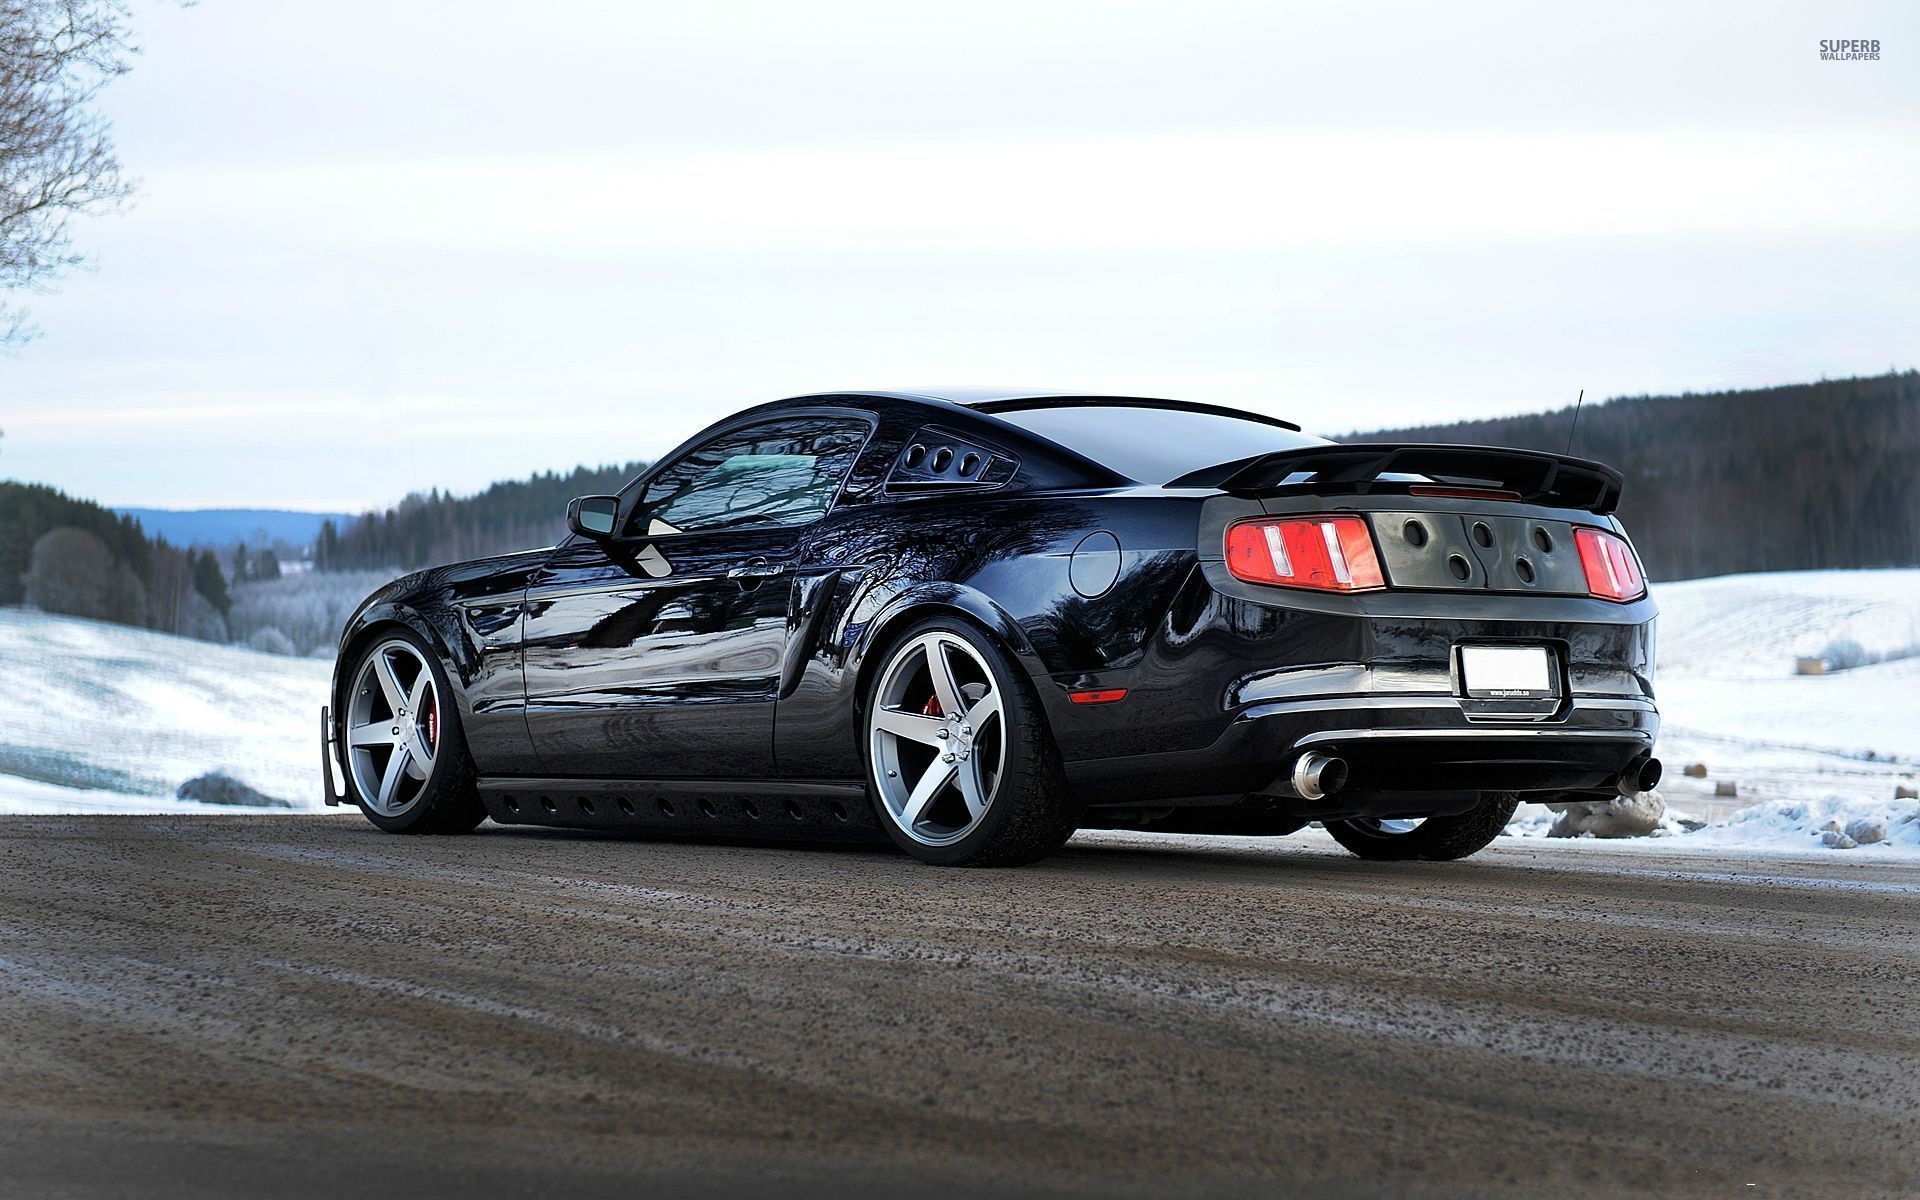 1967 Ford Mustang Shelby Cobra Gt500 Eleanor - Mustang Gt 2013 Tuning - HD Wallpaper 